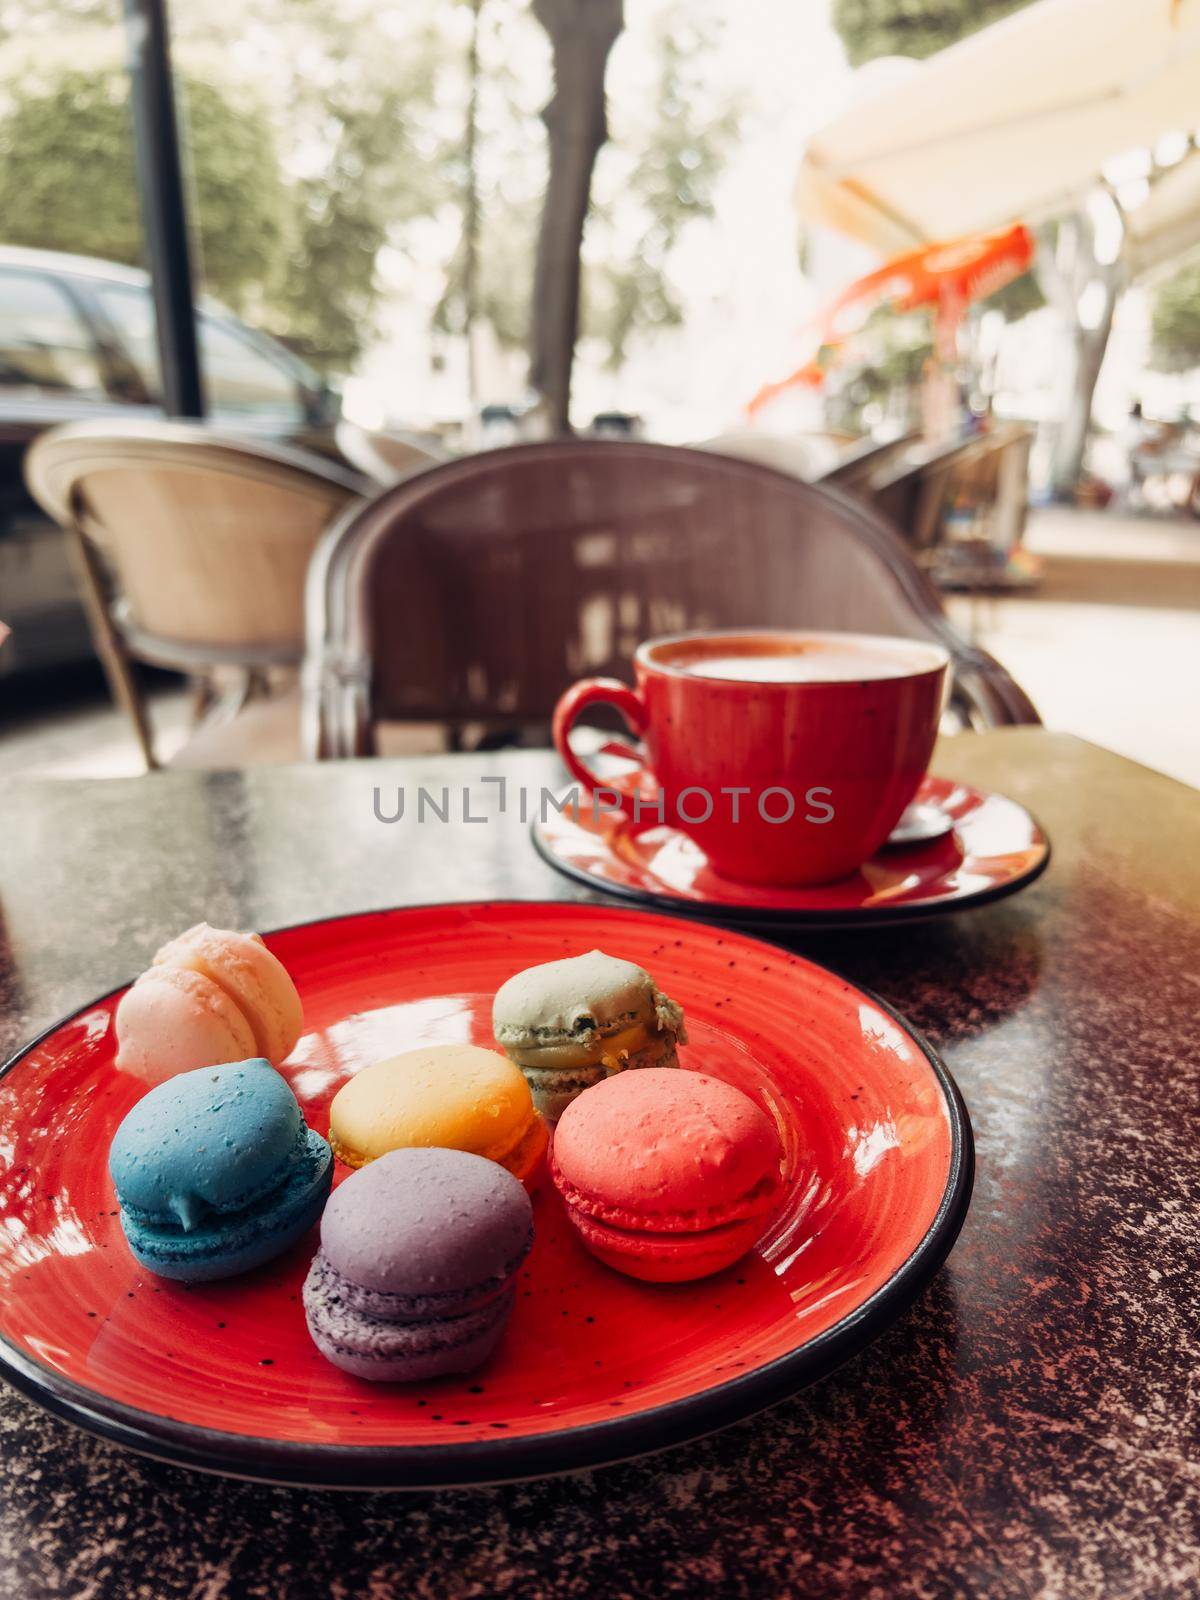 A close up picture of colourful macaron macaroon cakes and coffee mug taken in a street cafe by Ostanina